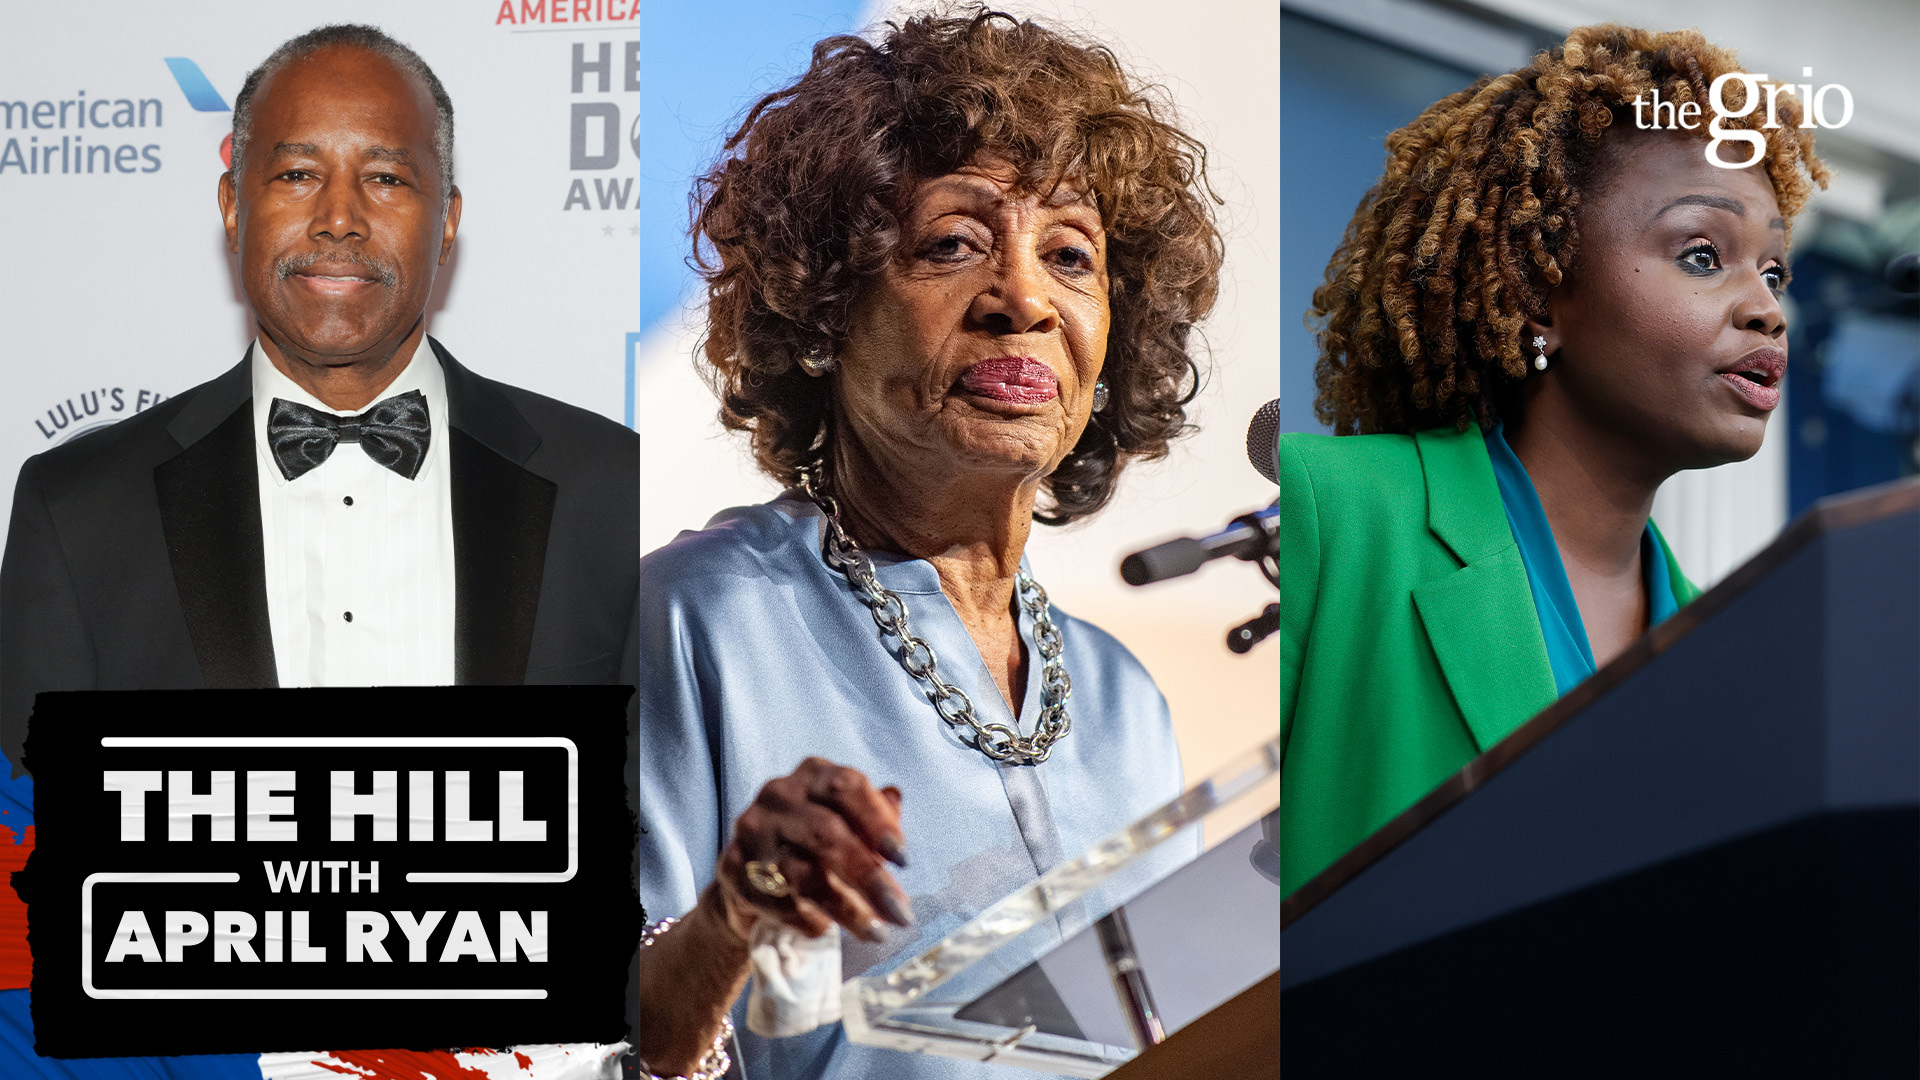 Watch: ‘The Hill with April Ryan’ explores Trump’s potential Black running mate